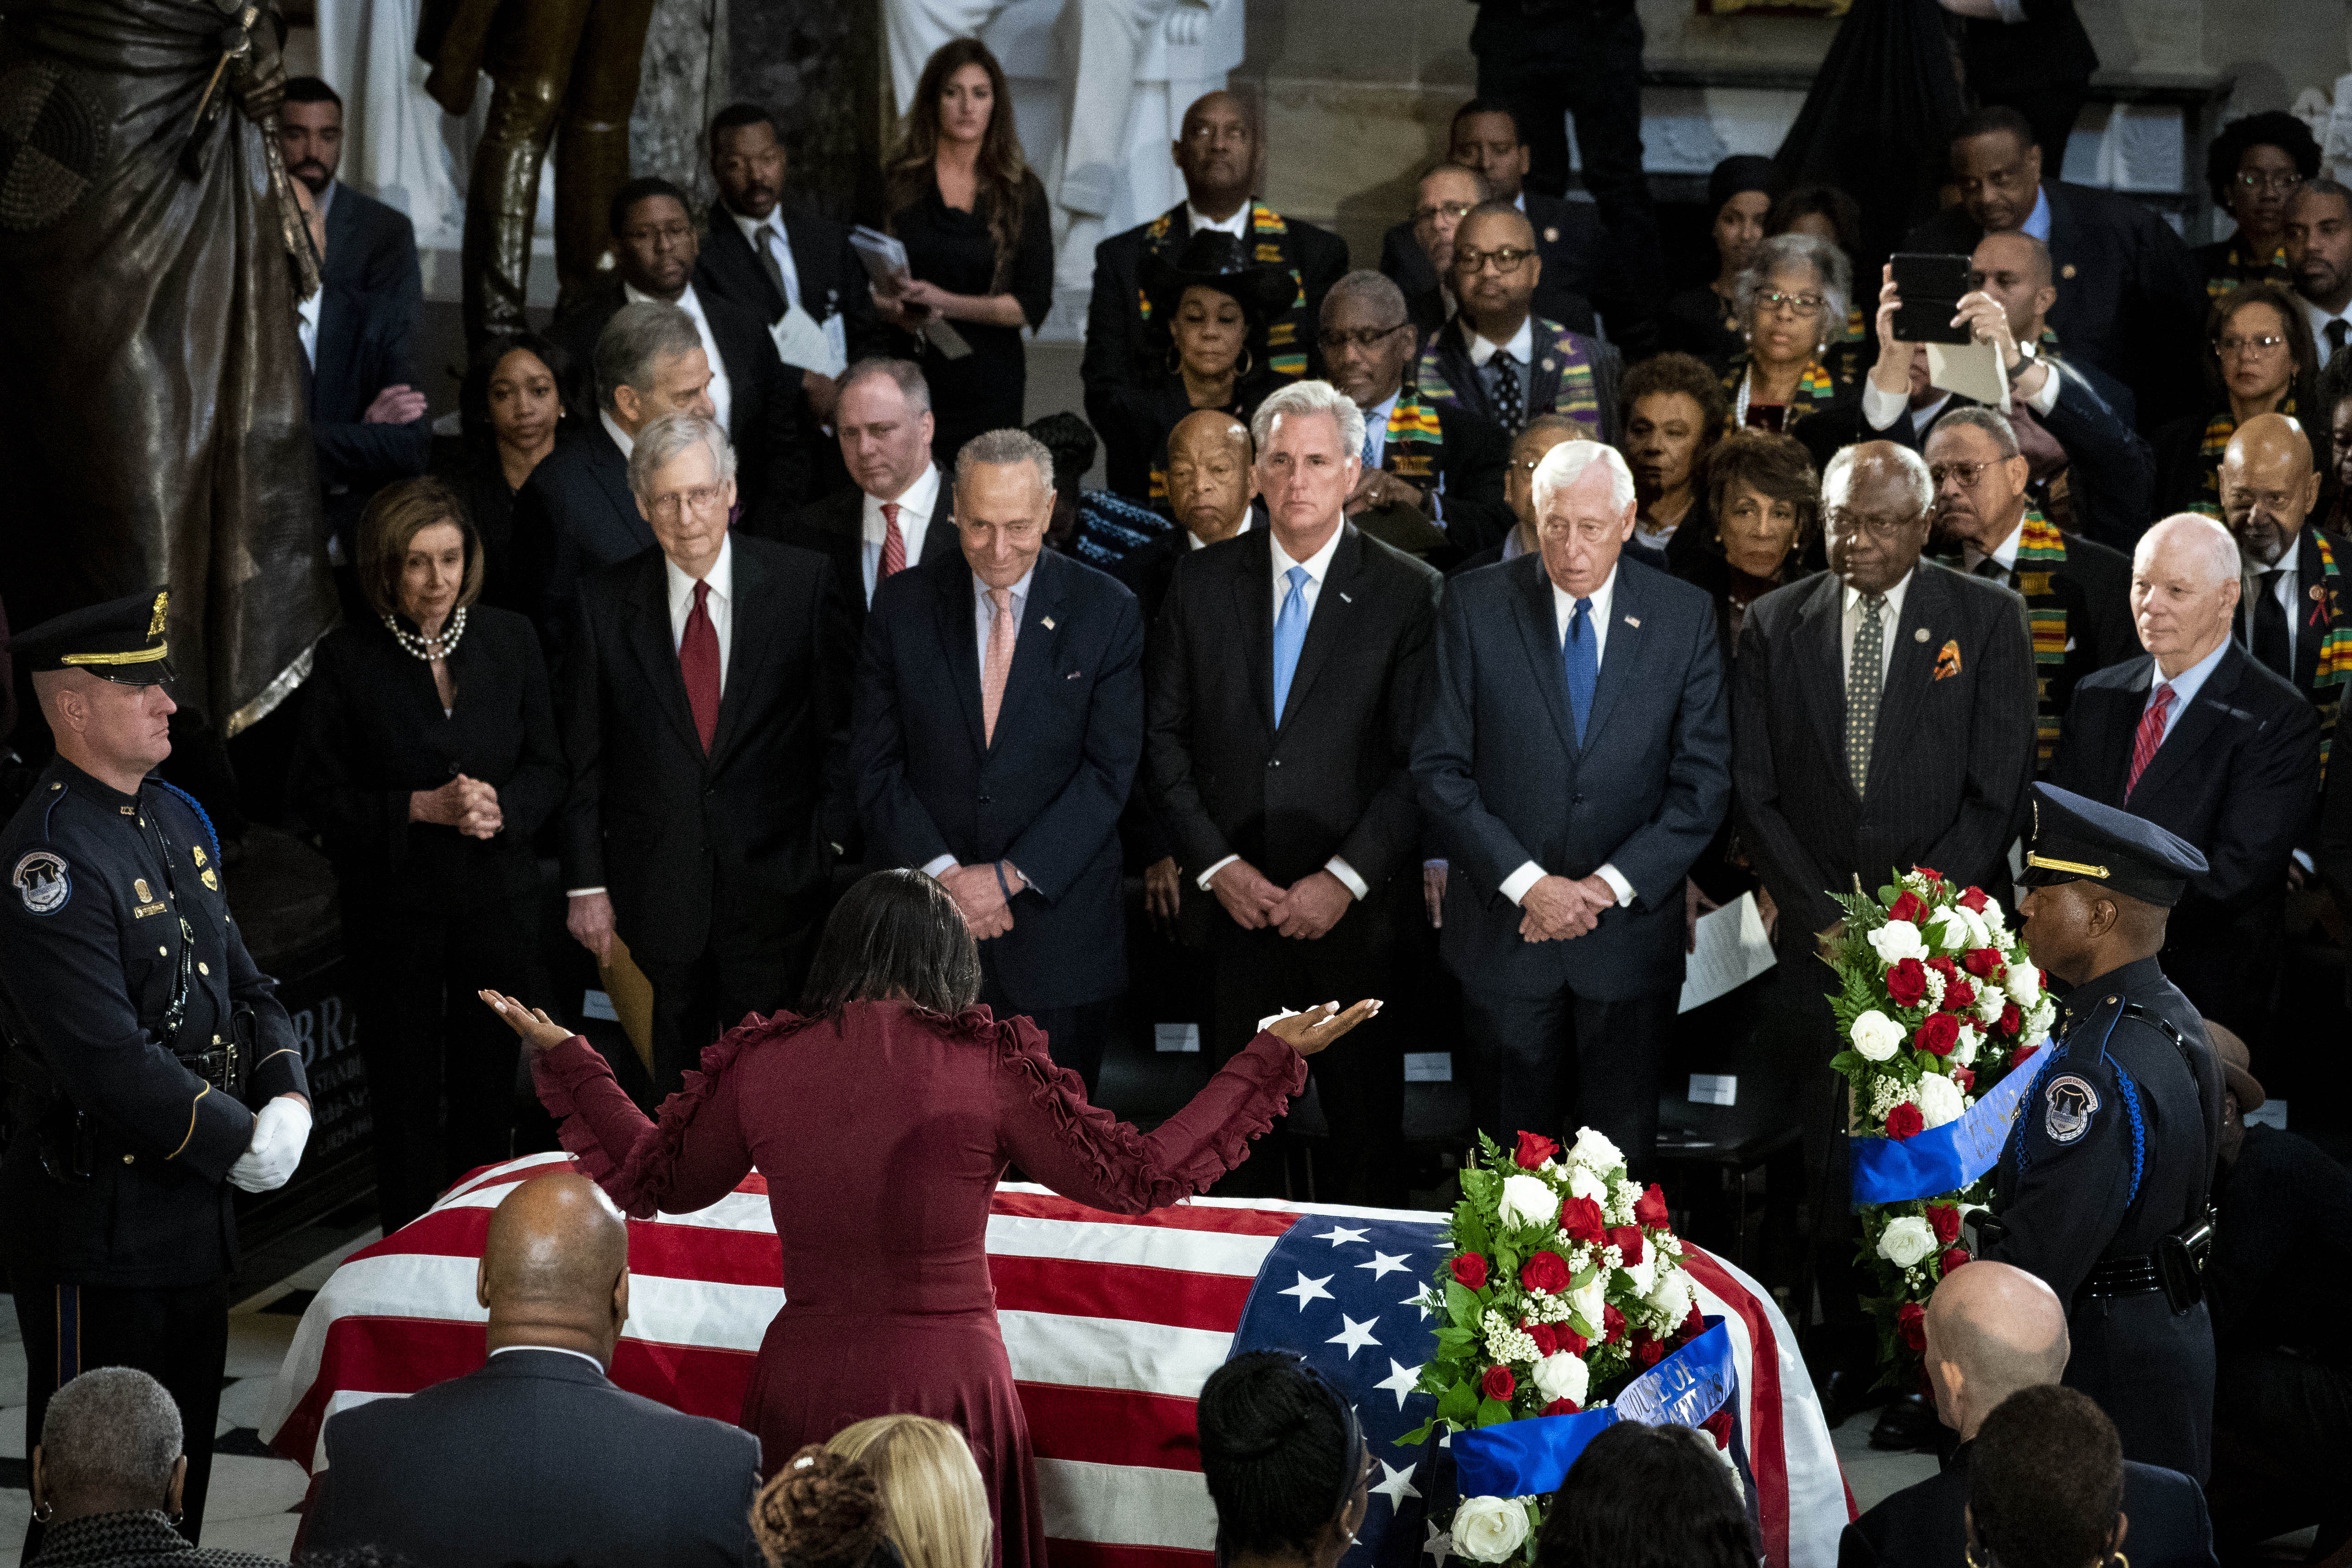 Maya Rockeymoore Cummings, widow of late Rep. Elijah Cummings (D-MD), raises her arms over his casket during a memorial service in National Statuary Hall at the U.S. Capitol October 24, 2019 in Washington, DC. (Photo by Al Drago-Pool/Getty Images)